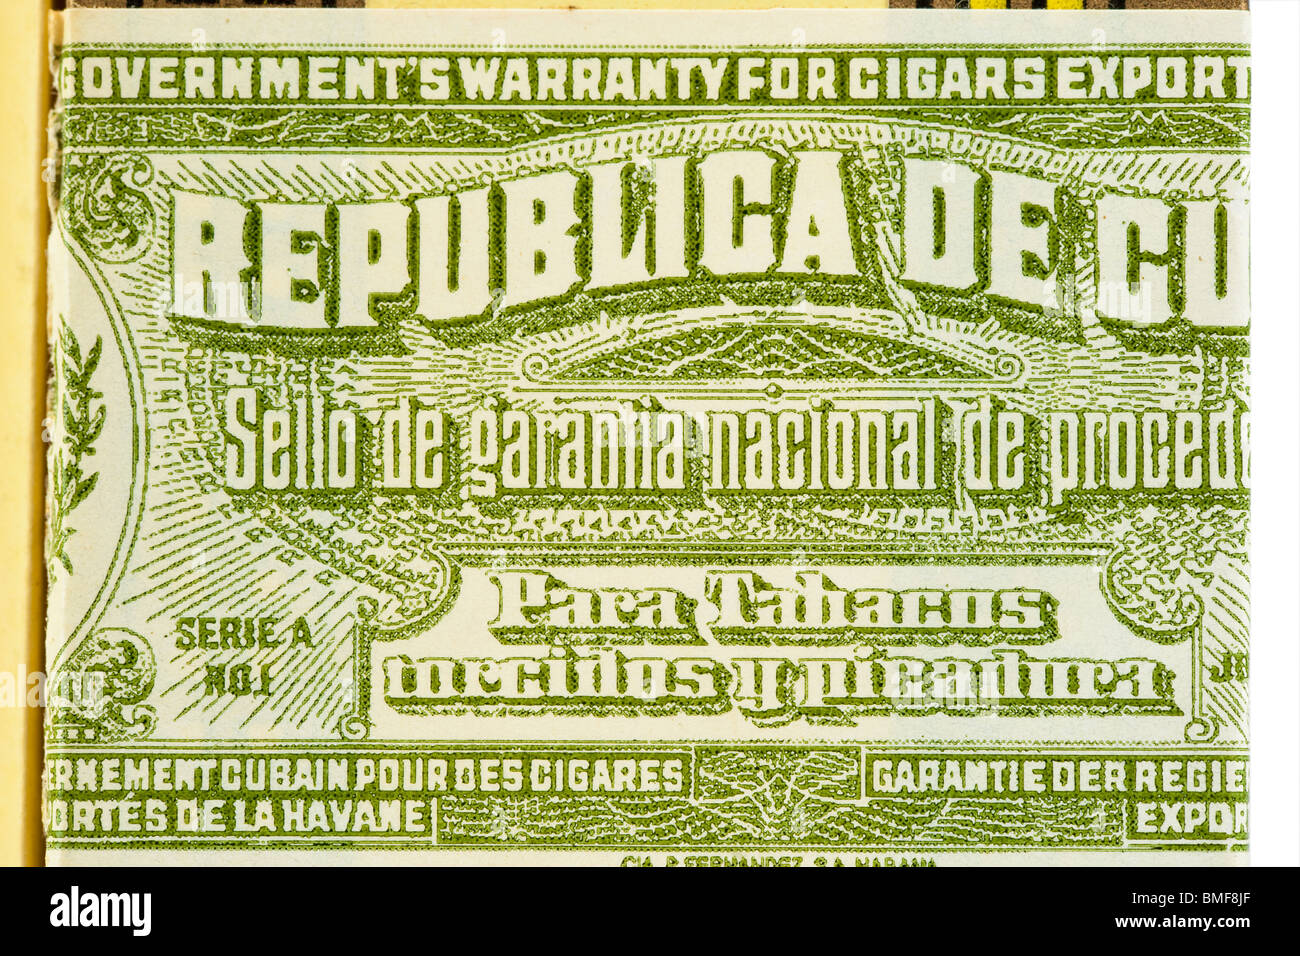 a government's warranty for cuban cigars export Stock Photo